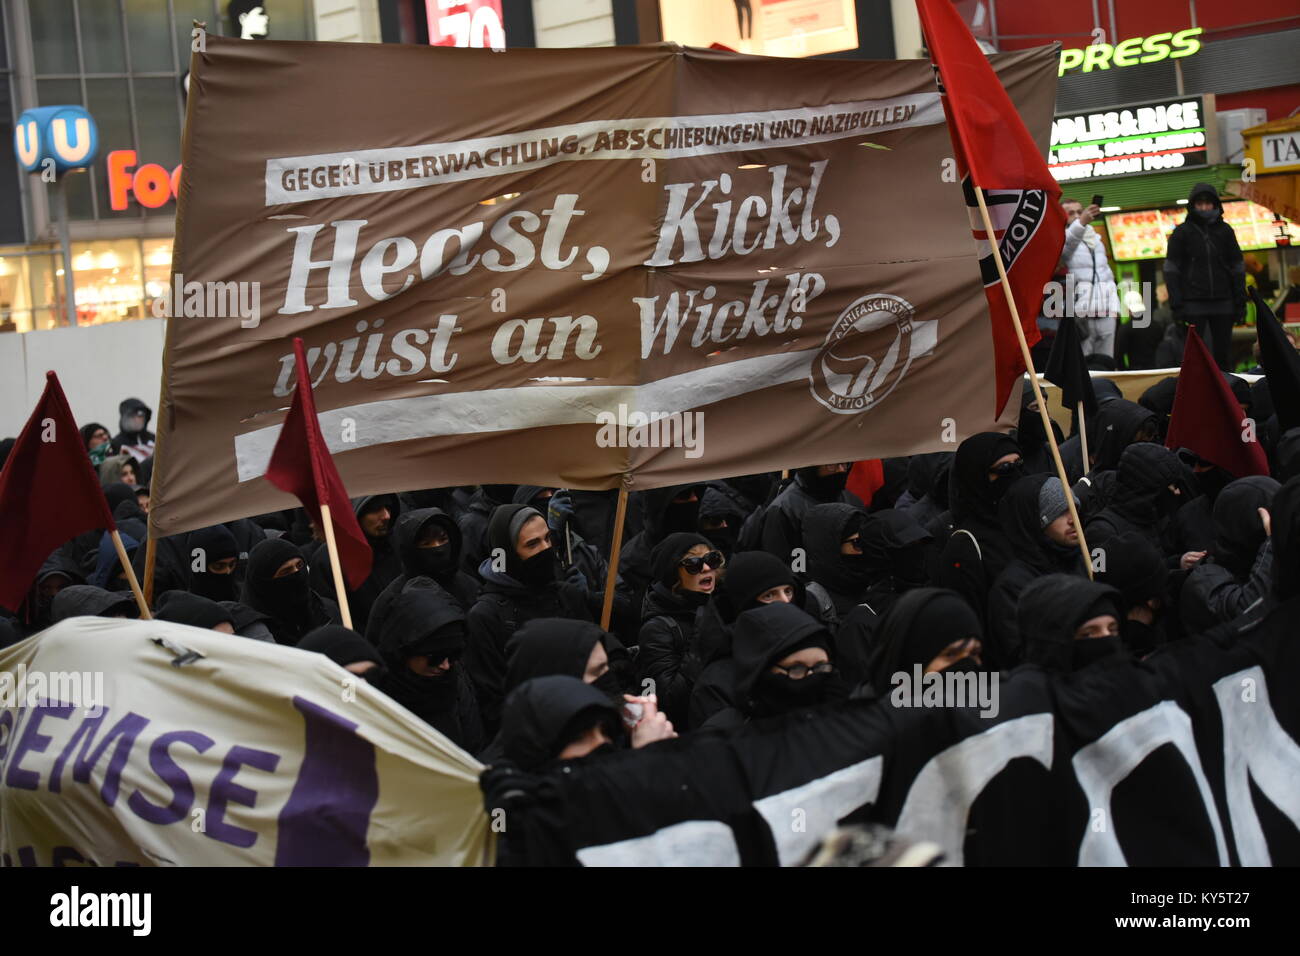 Vienna, Austria. 13th Jan, 2018. mummed protesters during an anti-government demonstration. the banner opposes Austria's interior minister Herbert Kickl from the right-wing freedom party. Credit: Vincent Sufiyan/Alamy Live News Stock Photo